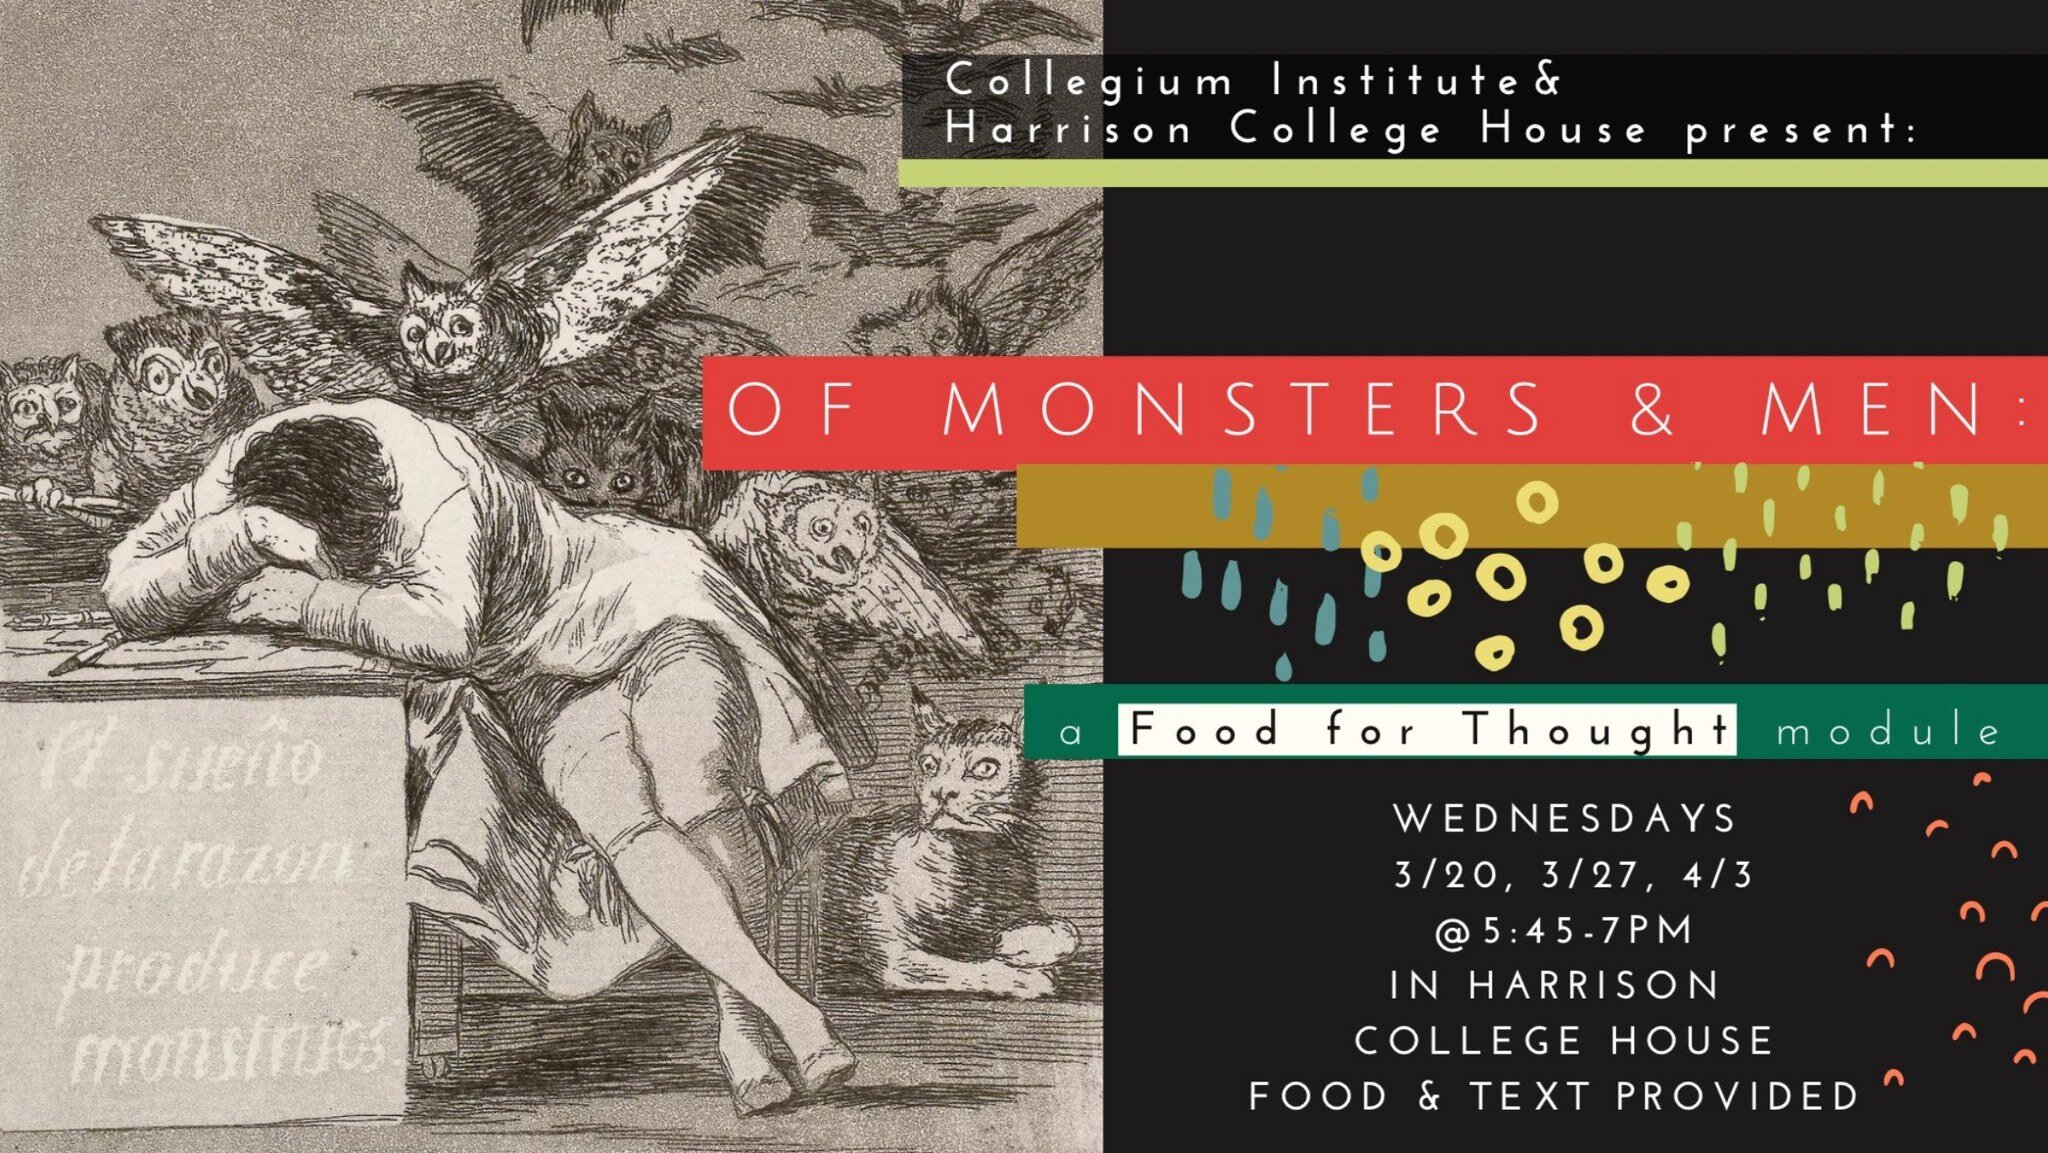 Next week: join us for the first session of our Food for Thought module, &quot;Of Monsters and Men,&quot; as we discuss monster theory ancient and modern. Dinner will be provided. Sign up here: collegiuminstitute.org/calendar/of-monsters-and-men